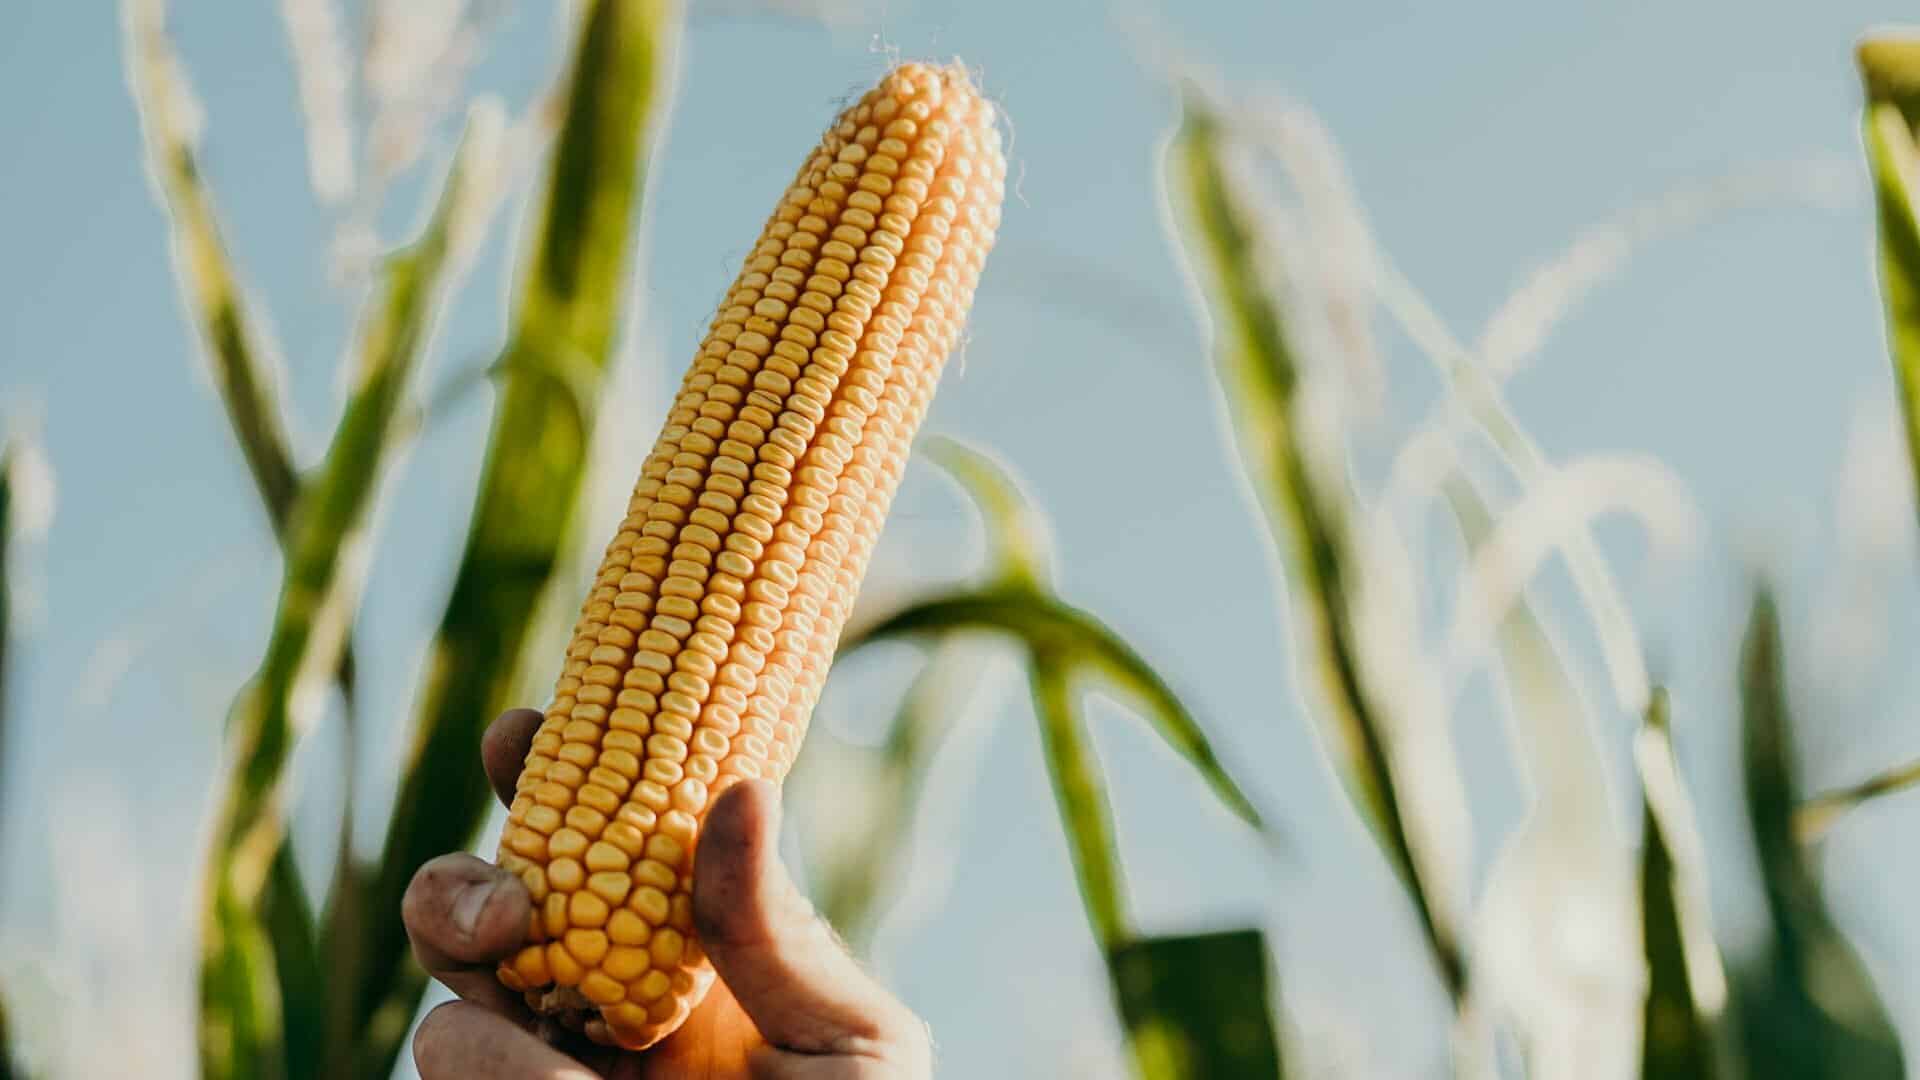 A farmer holds up an ear of field corn while standing in a cornfield.